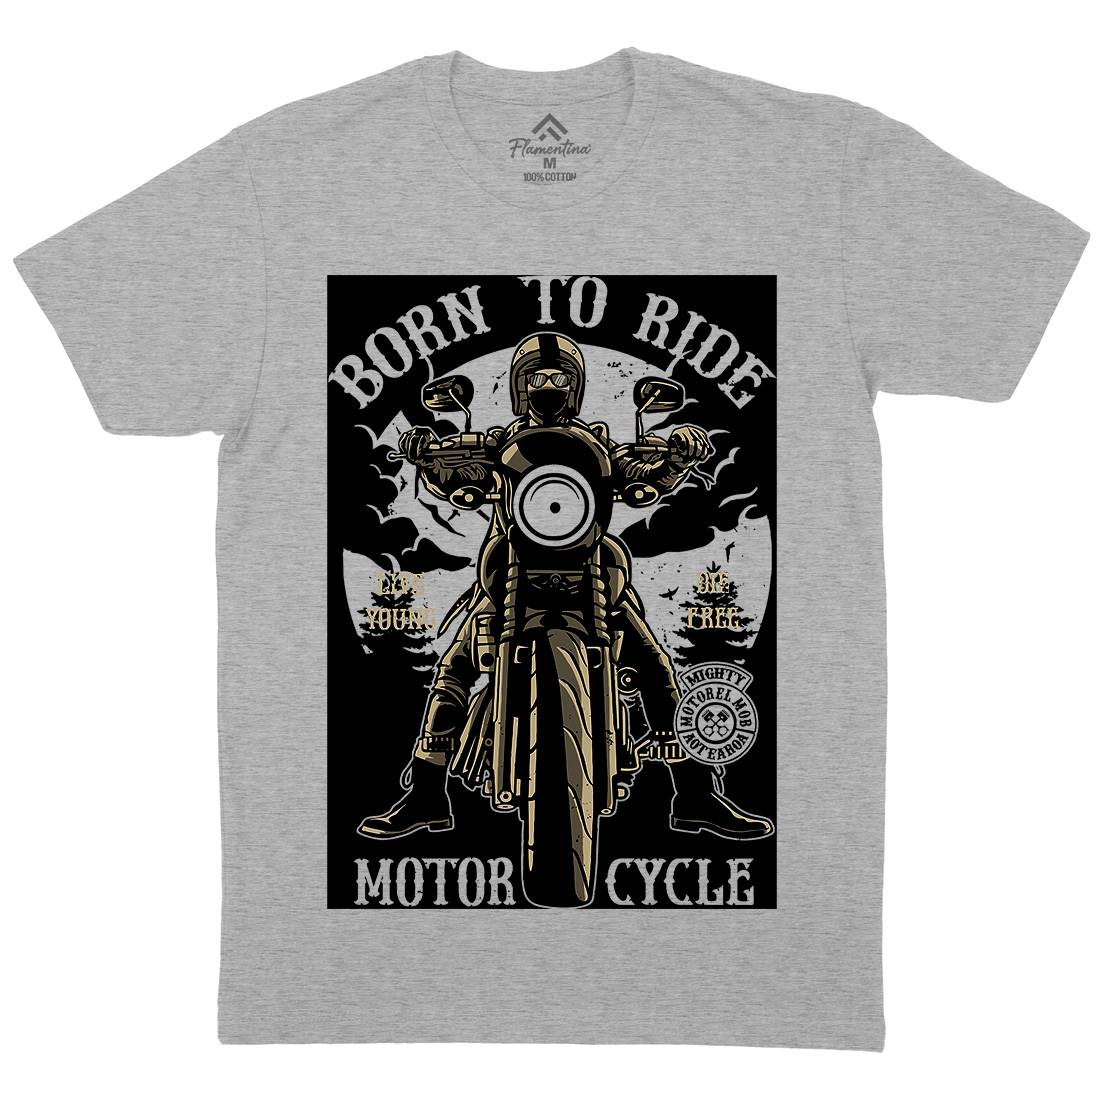 Born To Ride Mens Crew Neck T-Shirt Motorcycles A512